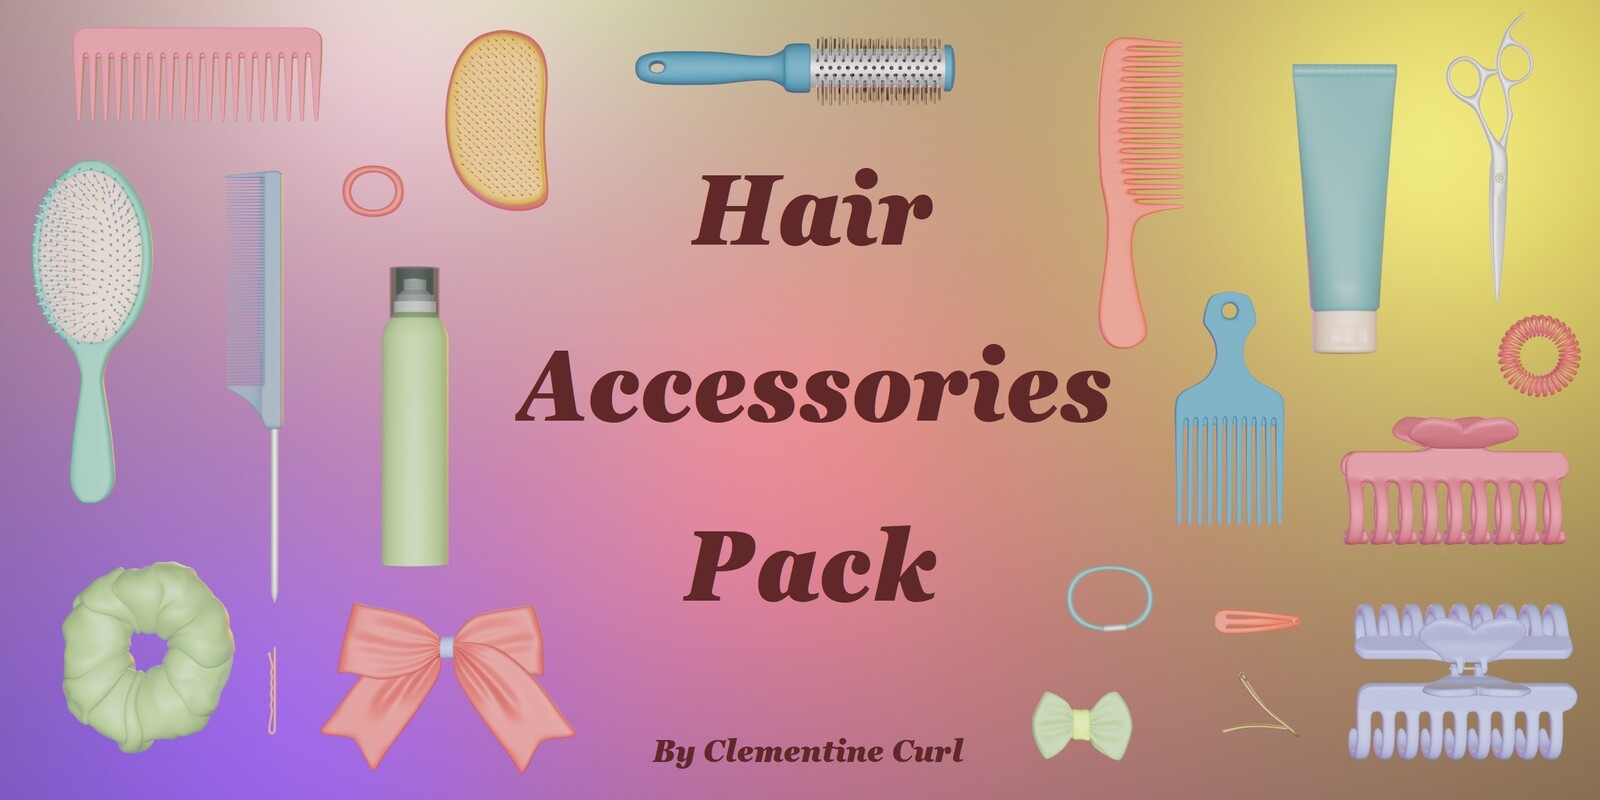 Hair Accessories Pack - 22 Hair Related Items